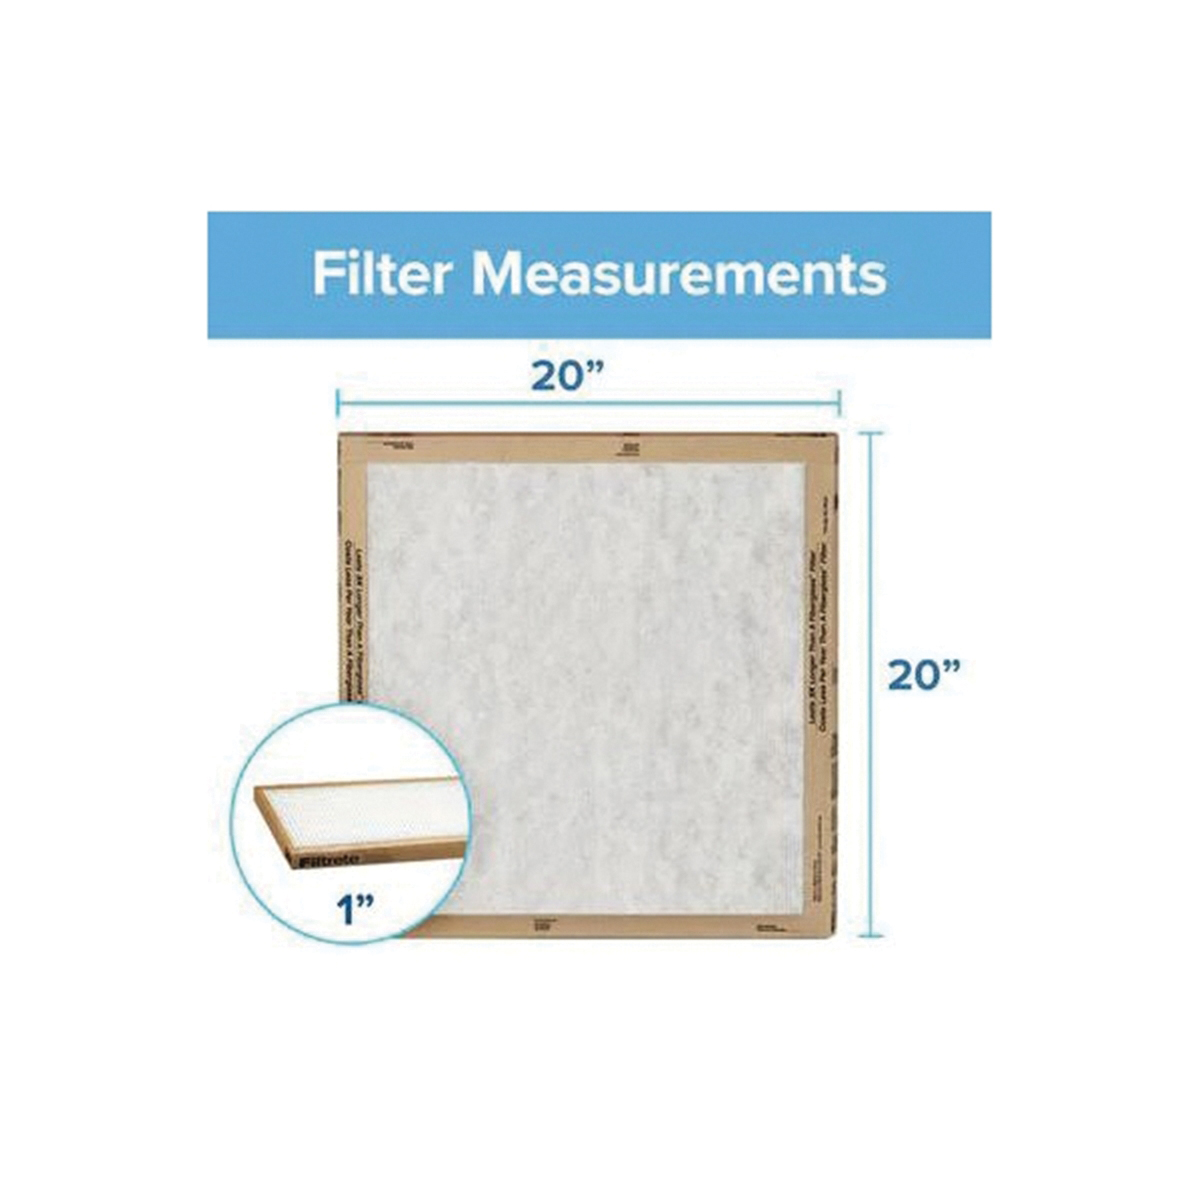 Filtrete FPL02-2PK-24 Flat Panel Air Filter, 20 in L, 20 in W, 2 MERV, For: Air Conditioner, Furnace and HVAC System - 4